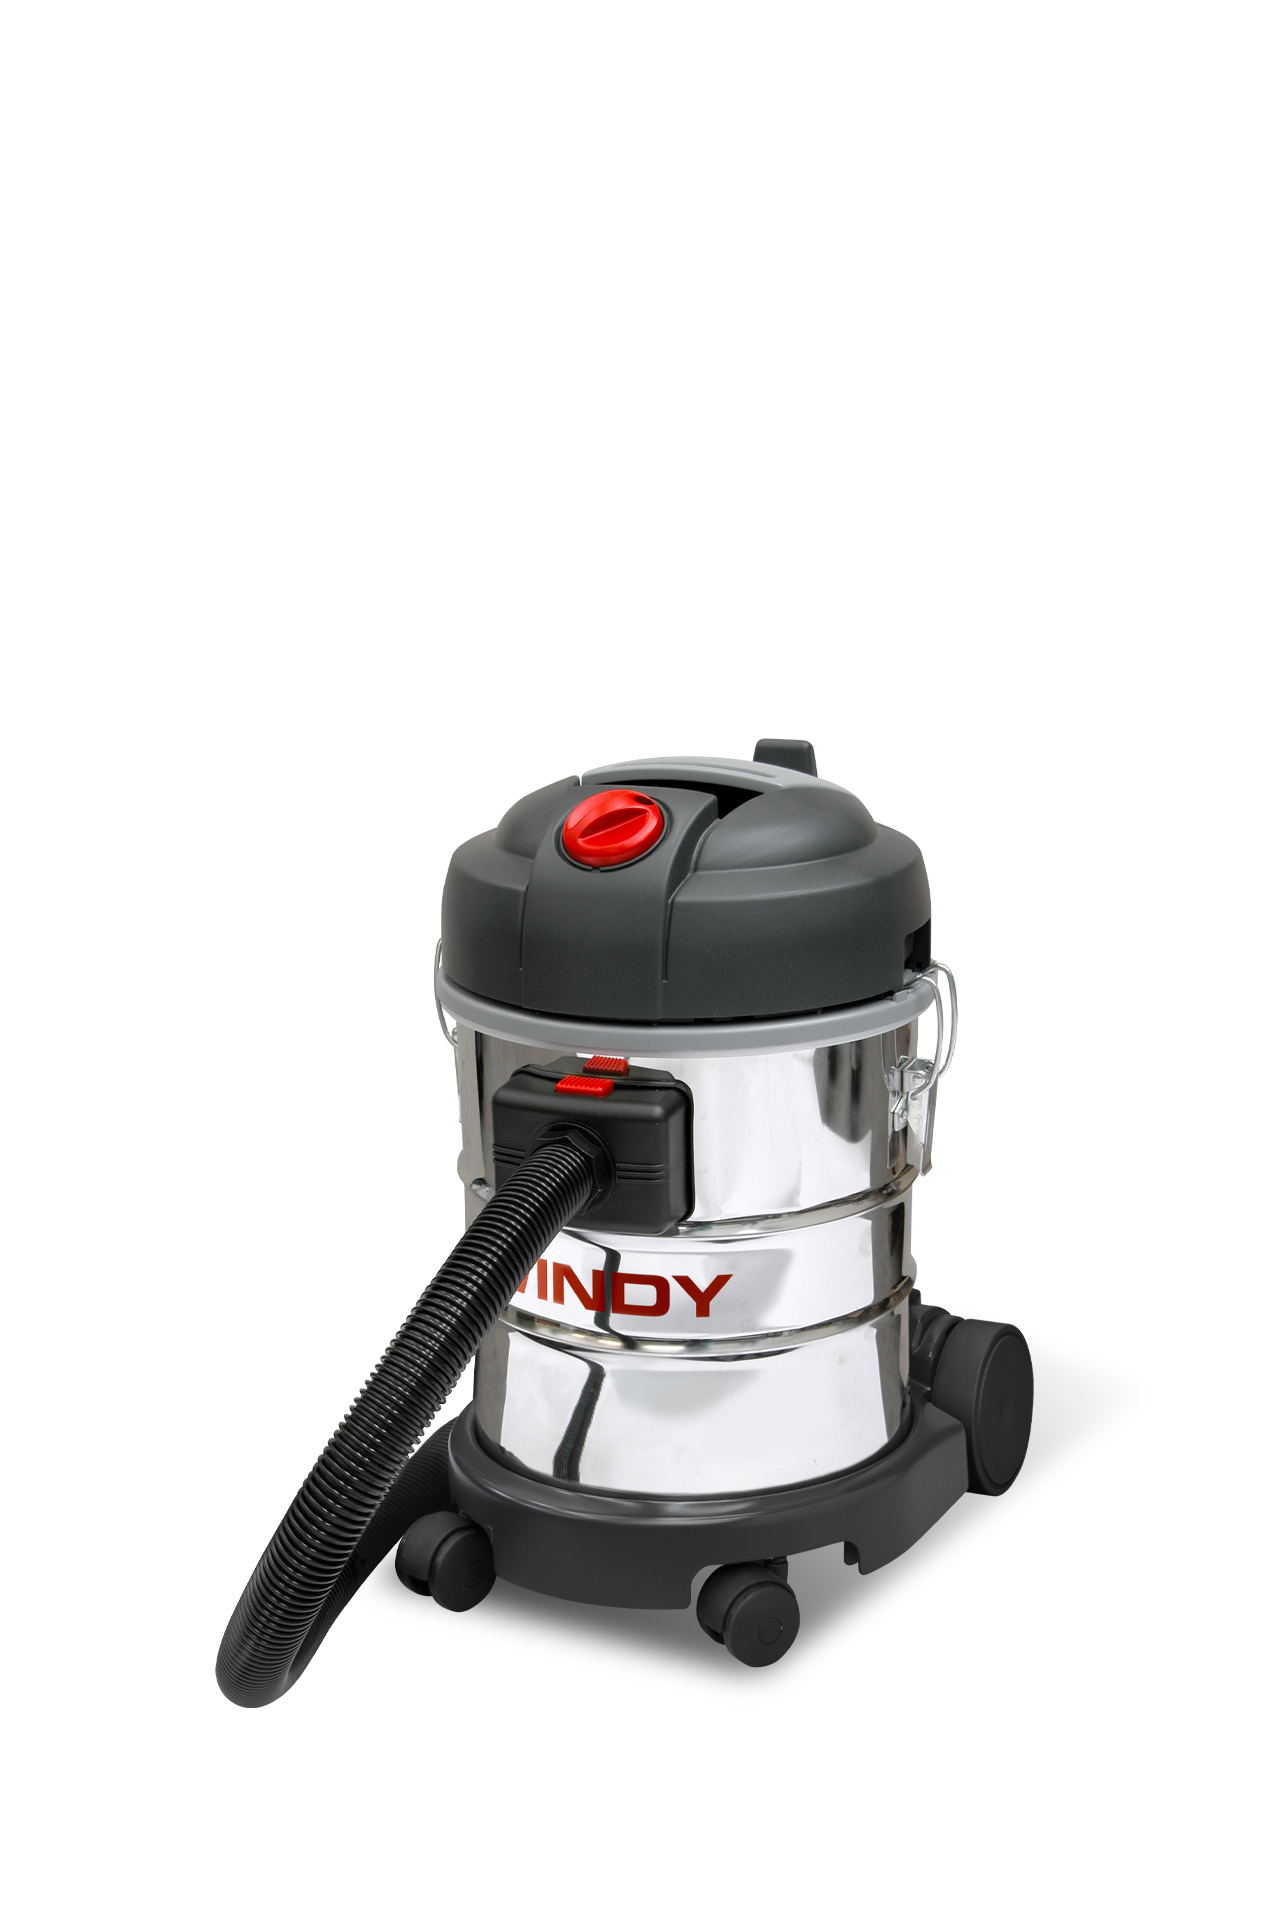 Wet & dry vacuum cleaners, WINDY 120 IF